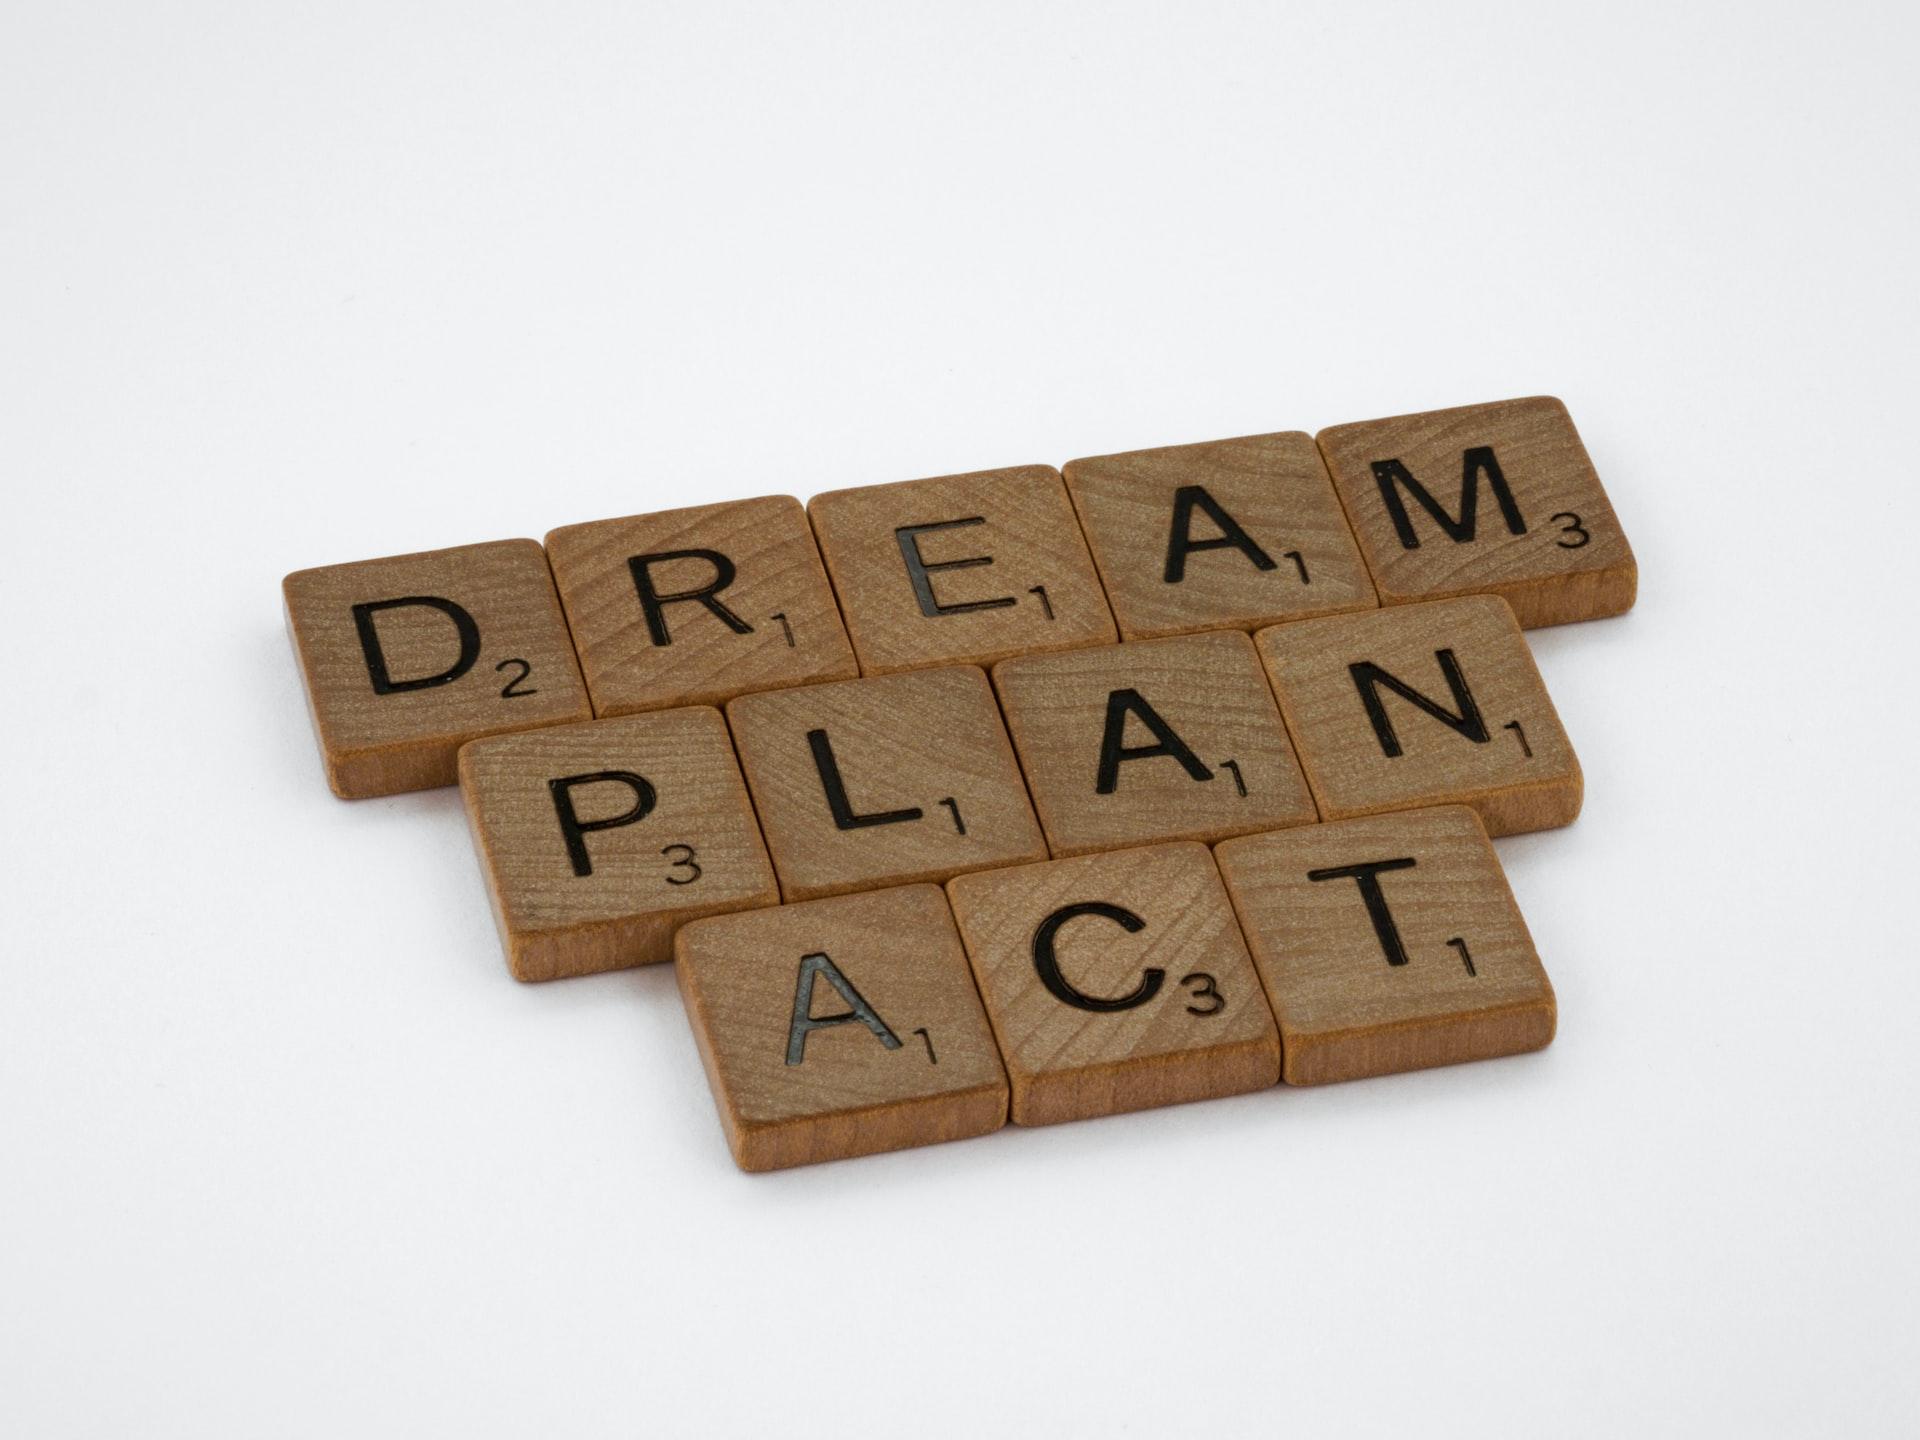 Image of scrabble tiles showing a business strategy planning concept